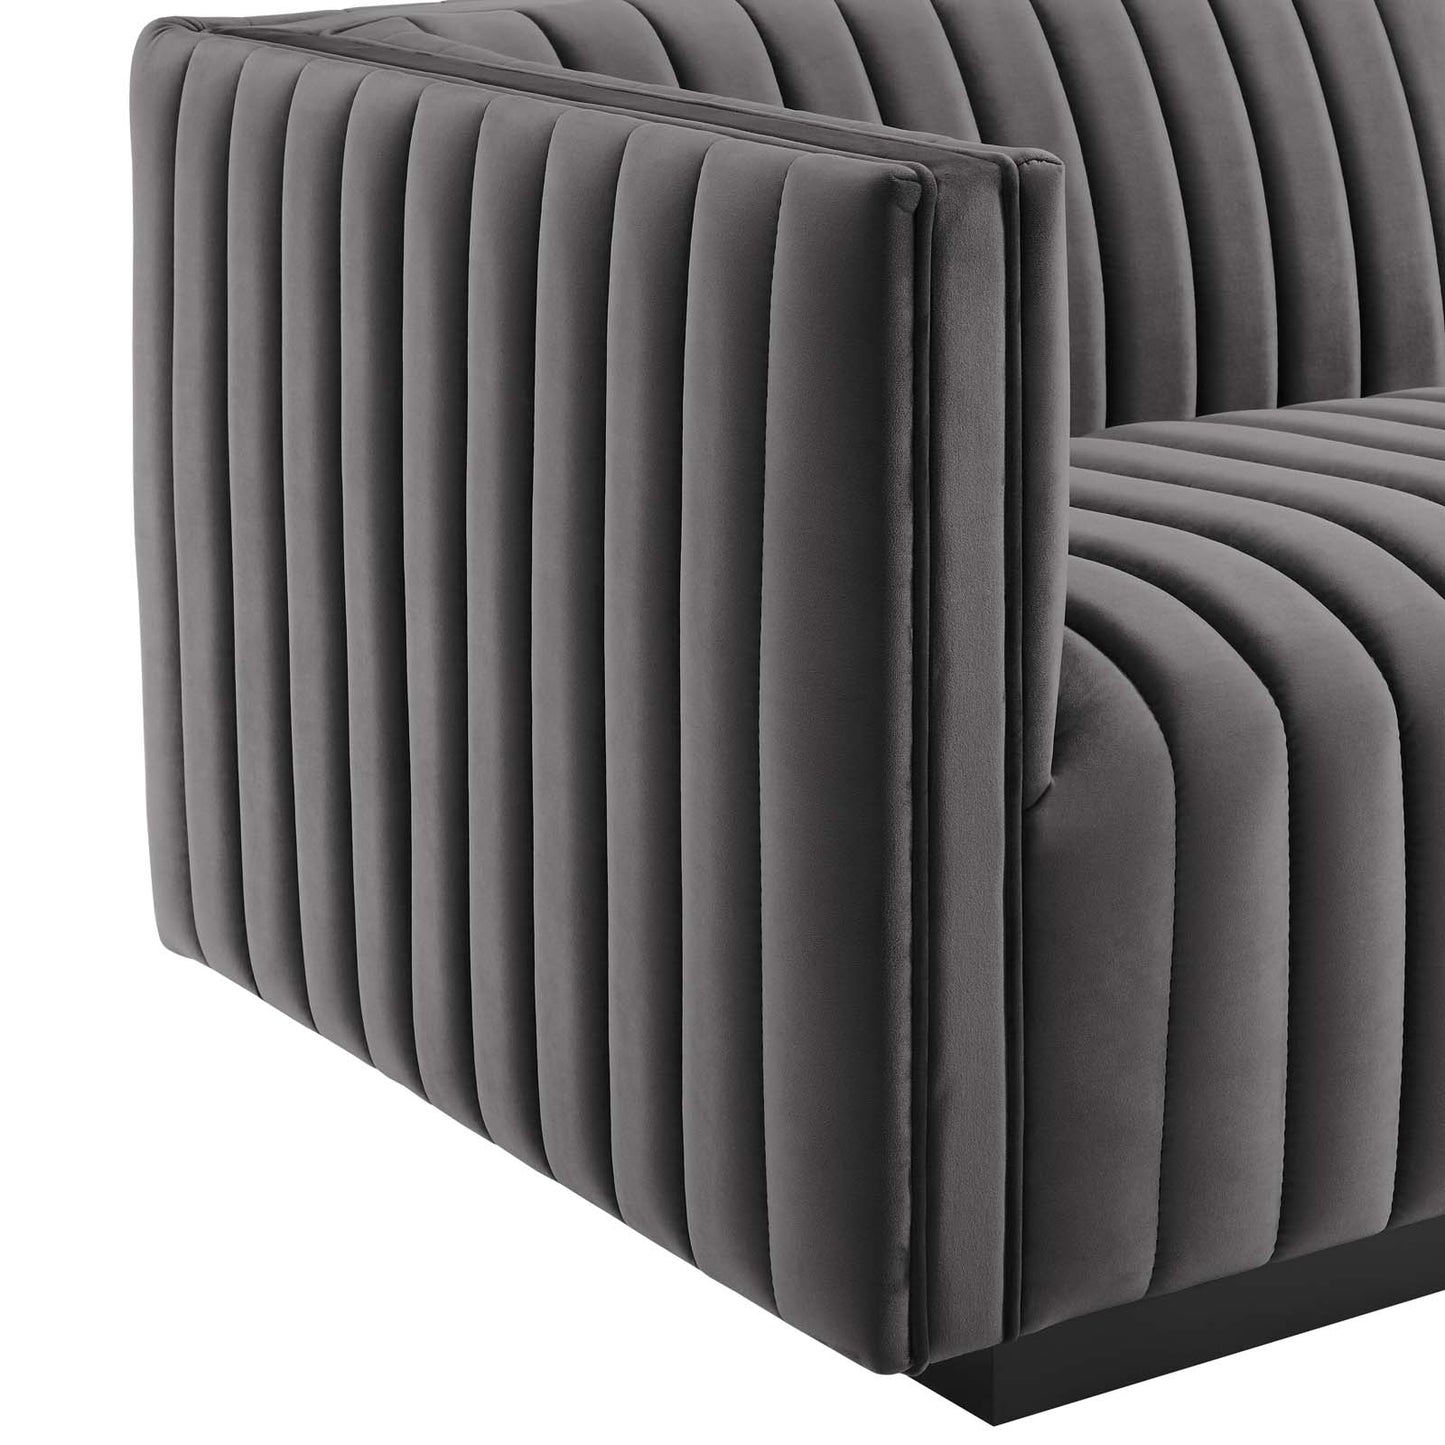 Conjure Channel Tufted Performance Velvet Left-Arm Chair Black Gray EEI-5490-BLK-GRY